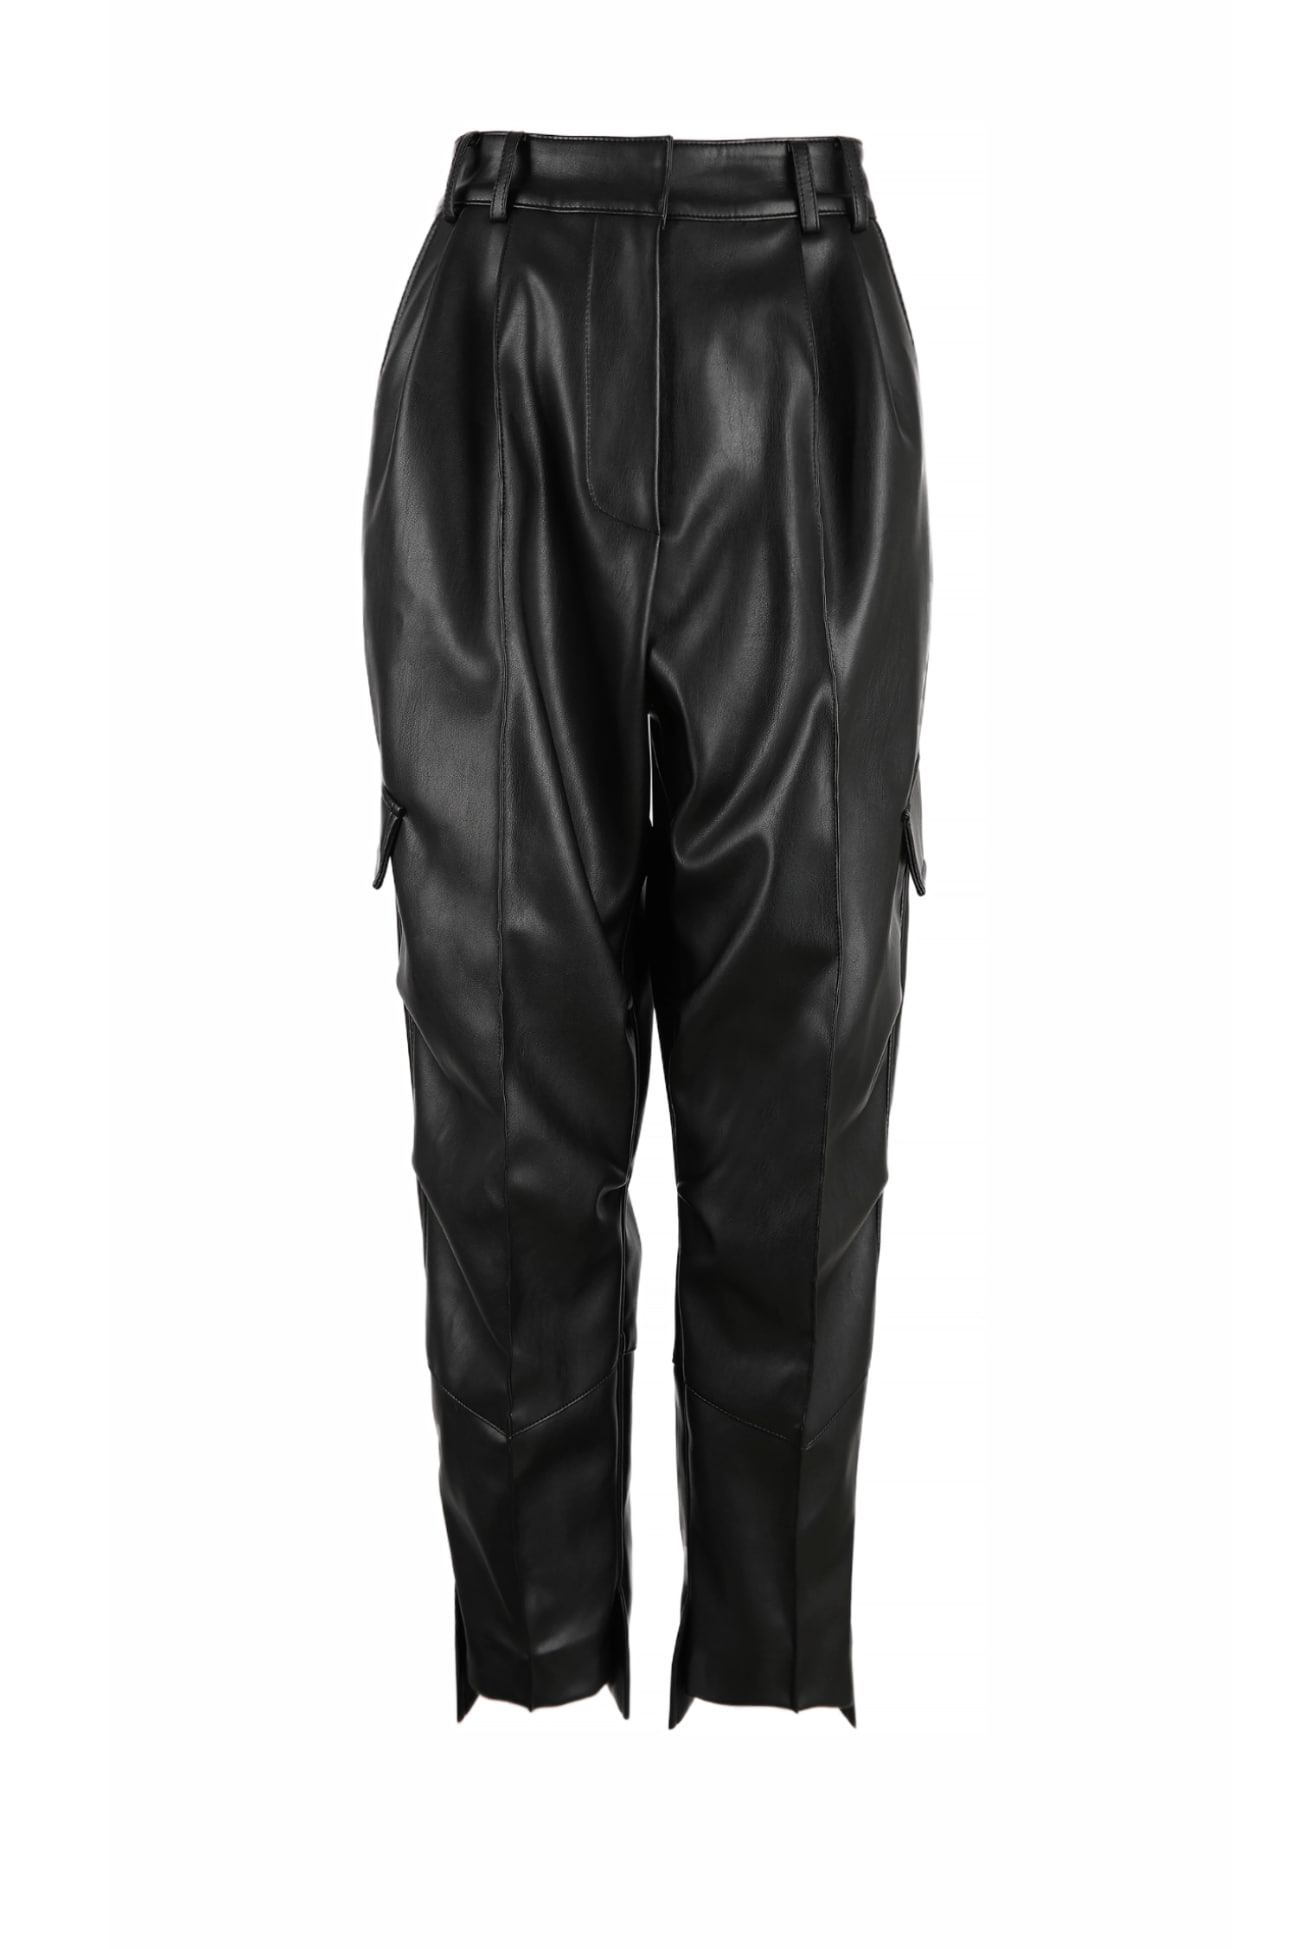 HIGH QUALITY LINE -Hailey high-rise cropped leather trousers